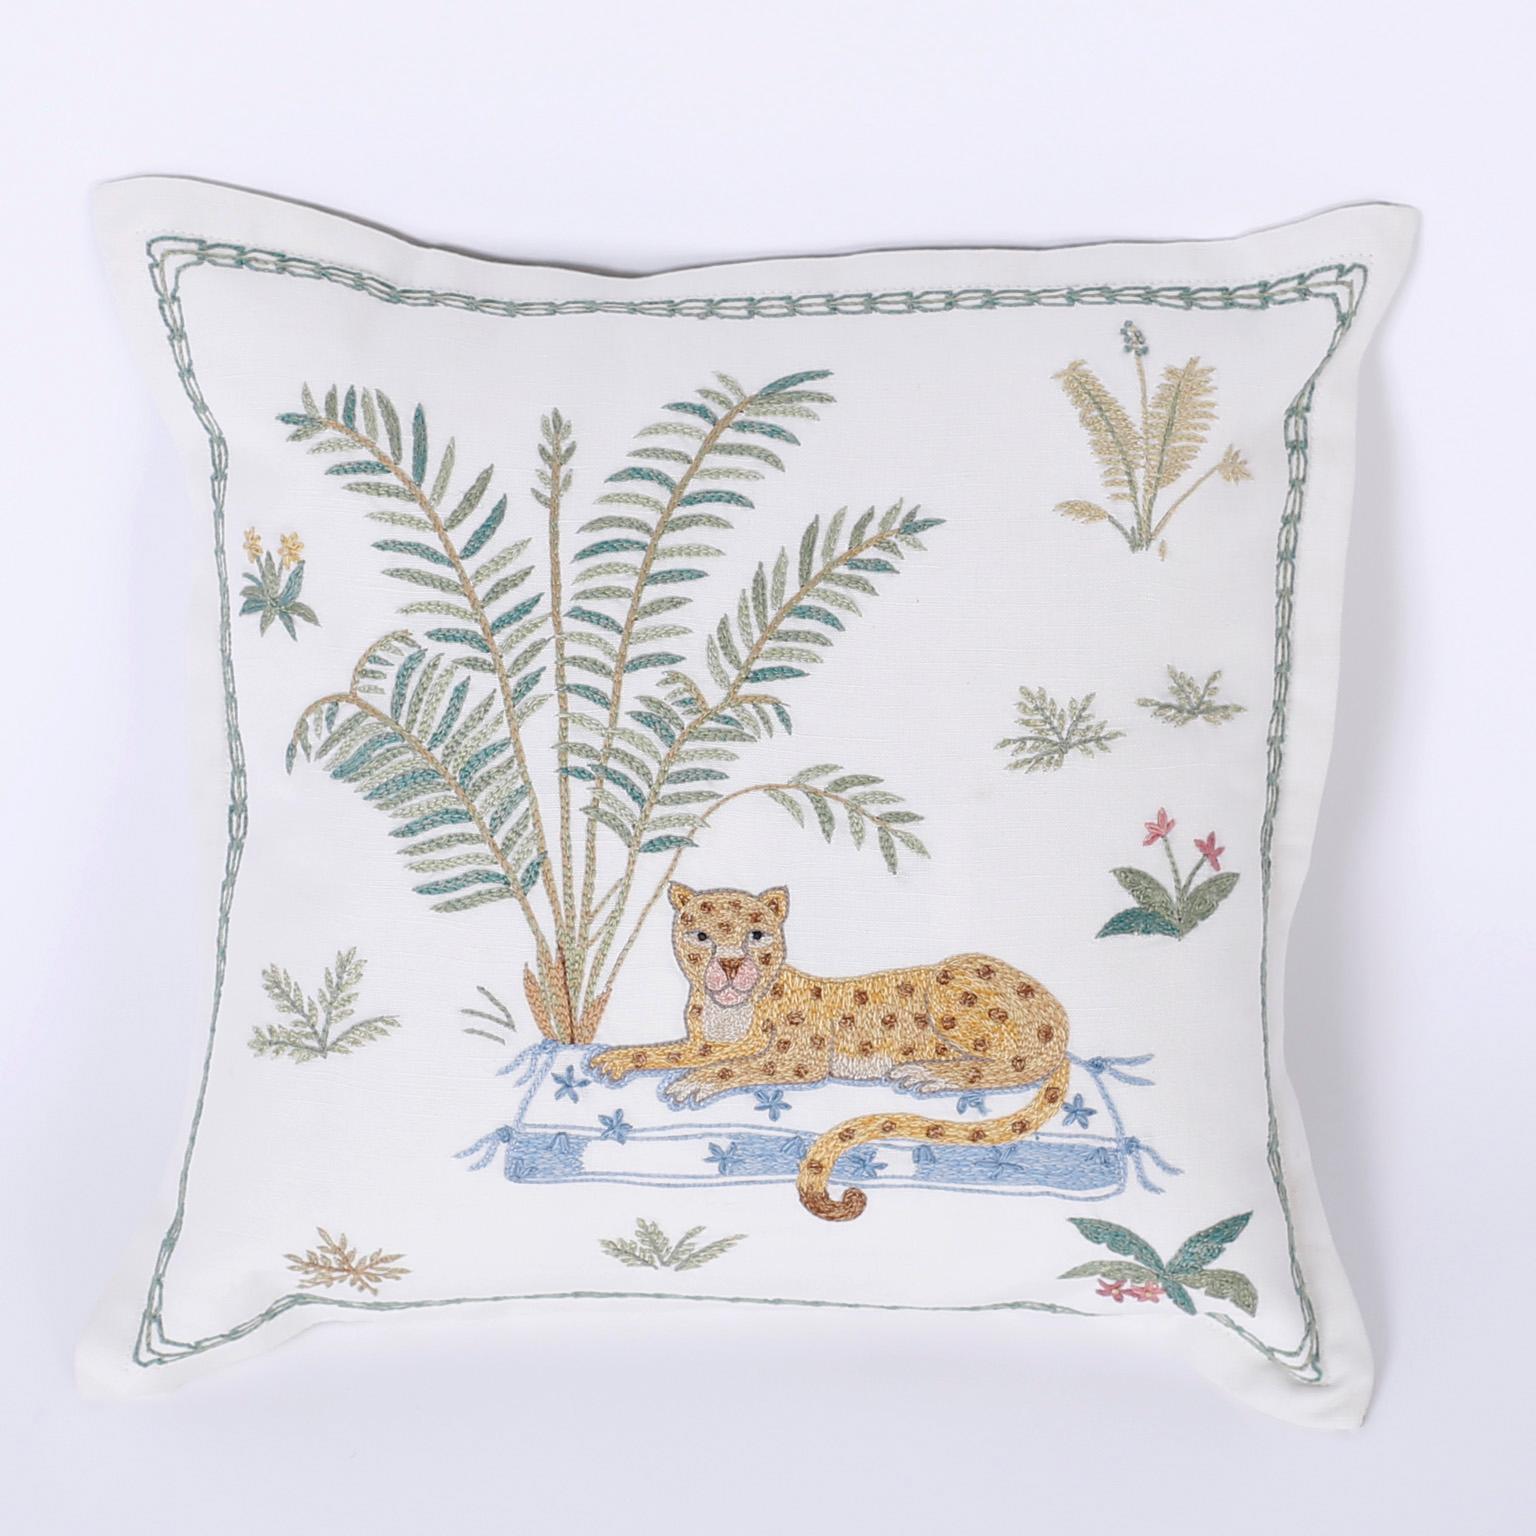 Whimsical linen pillows hand decorated with a cheetah on a rug under a palm tree. Button back for easy care. Priced individually.